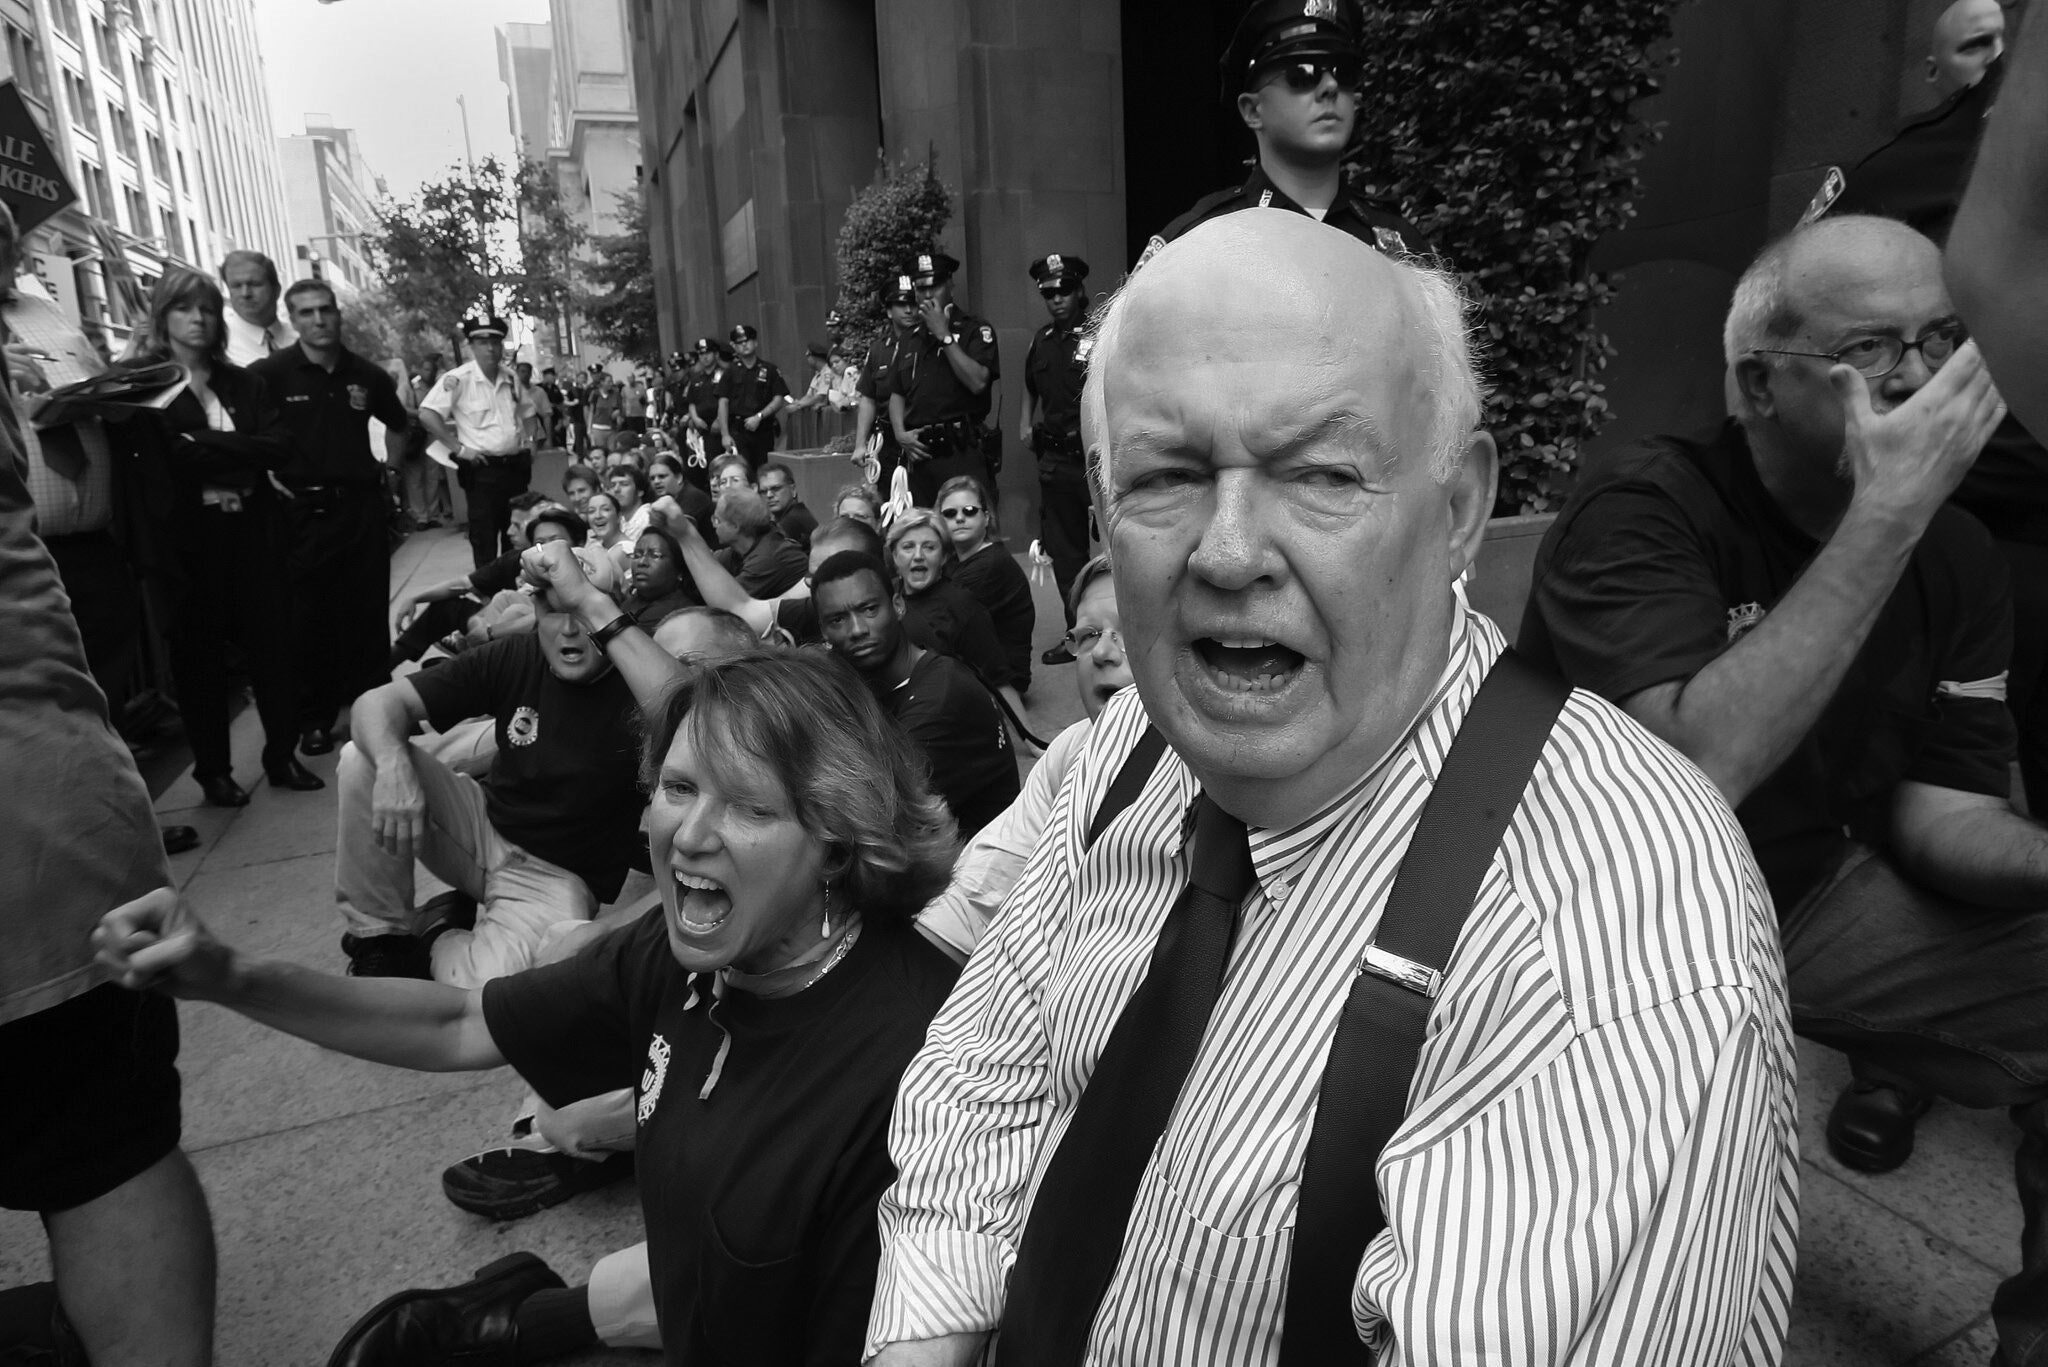 John Sweeney in 2005 at New York University in Manhattan during a protest by graduate assistants in a contract dispute. One of his priorities  was to expand labor’s rank-and-file. Credit: James Estrin/The New York Times